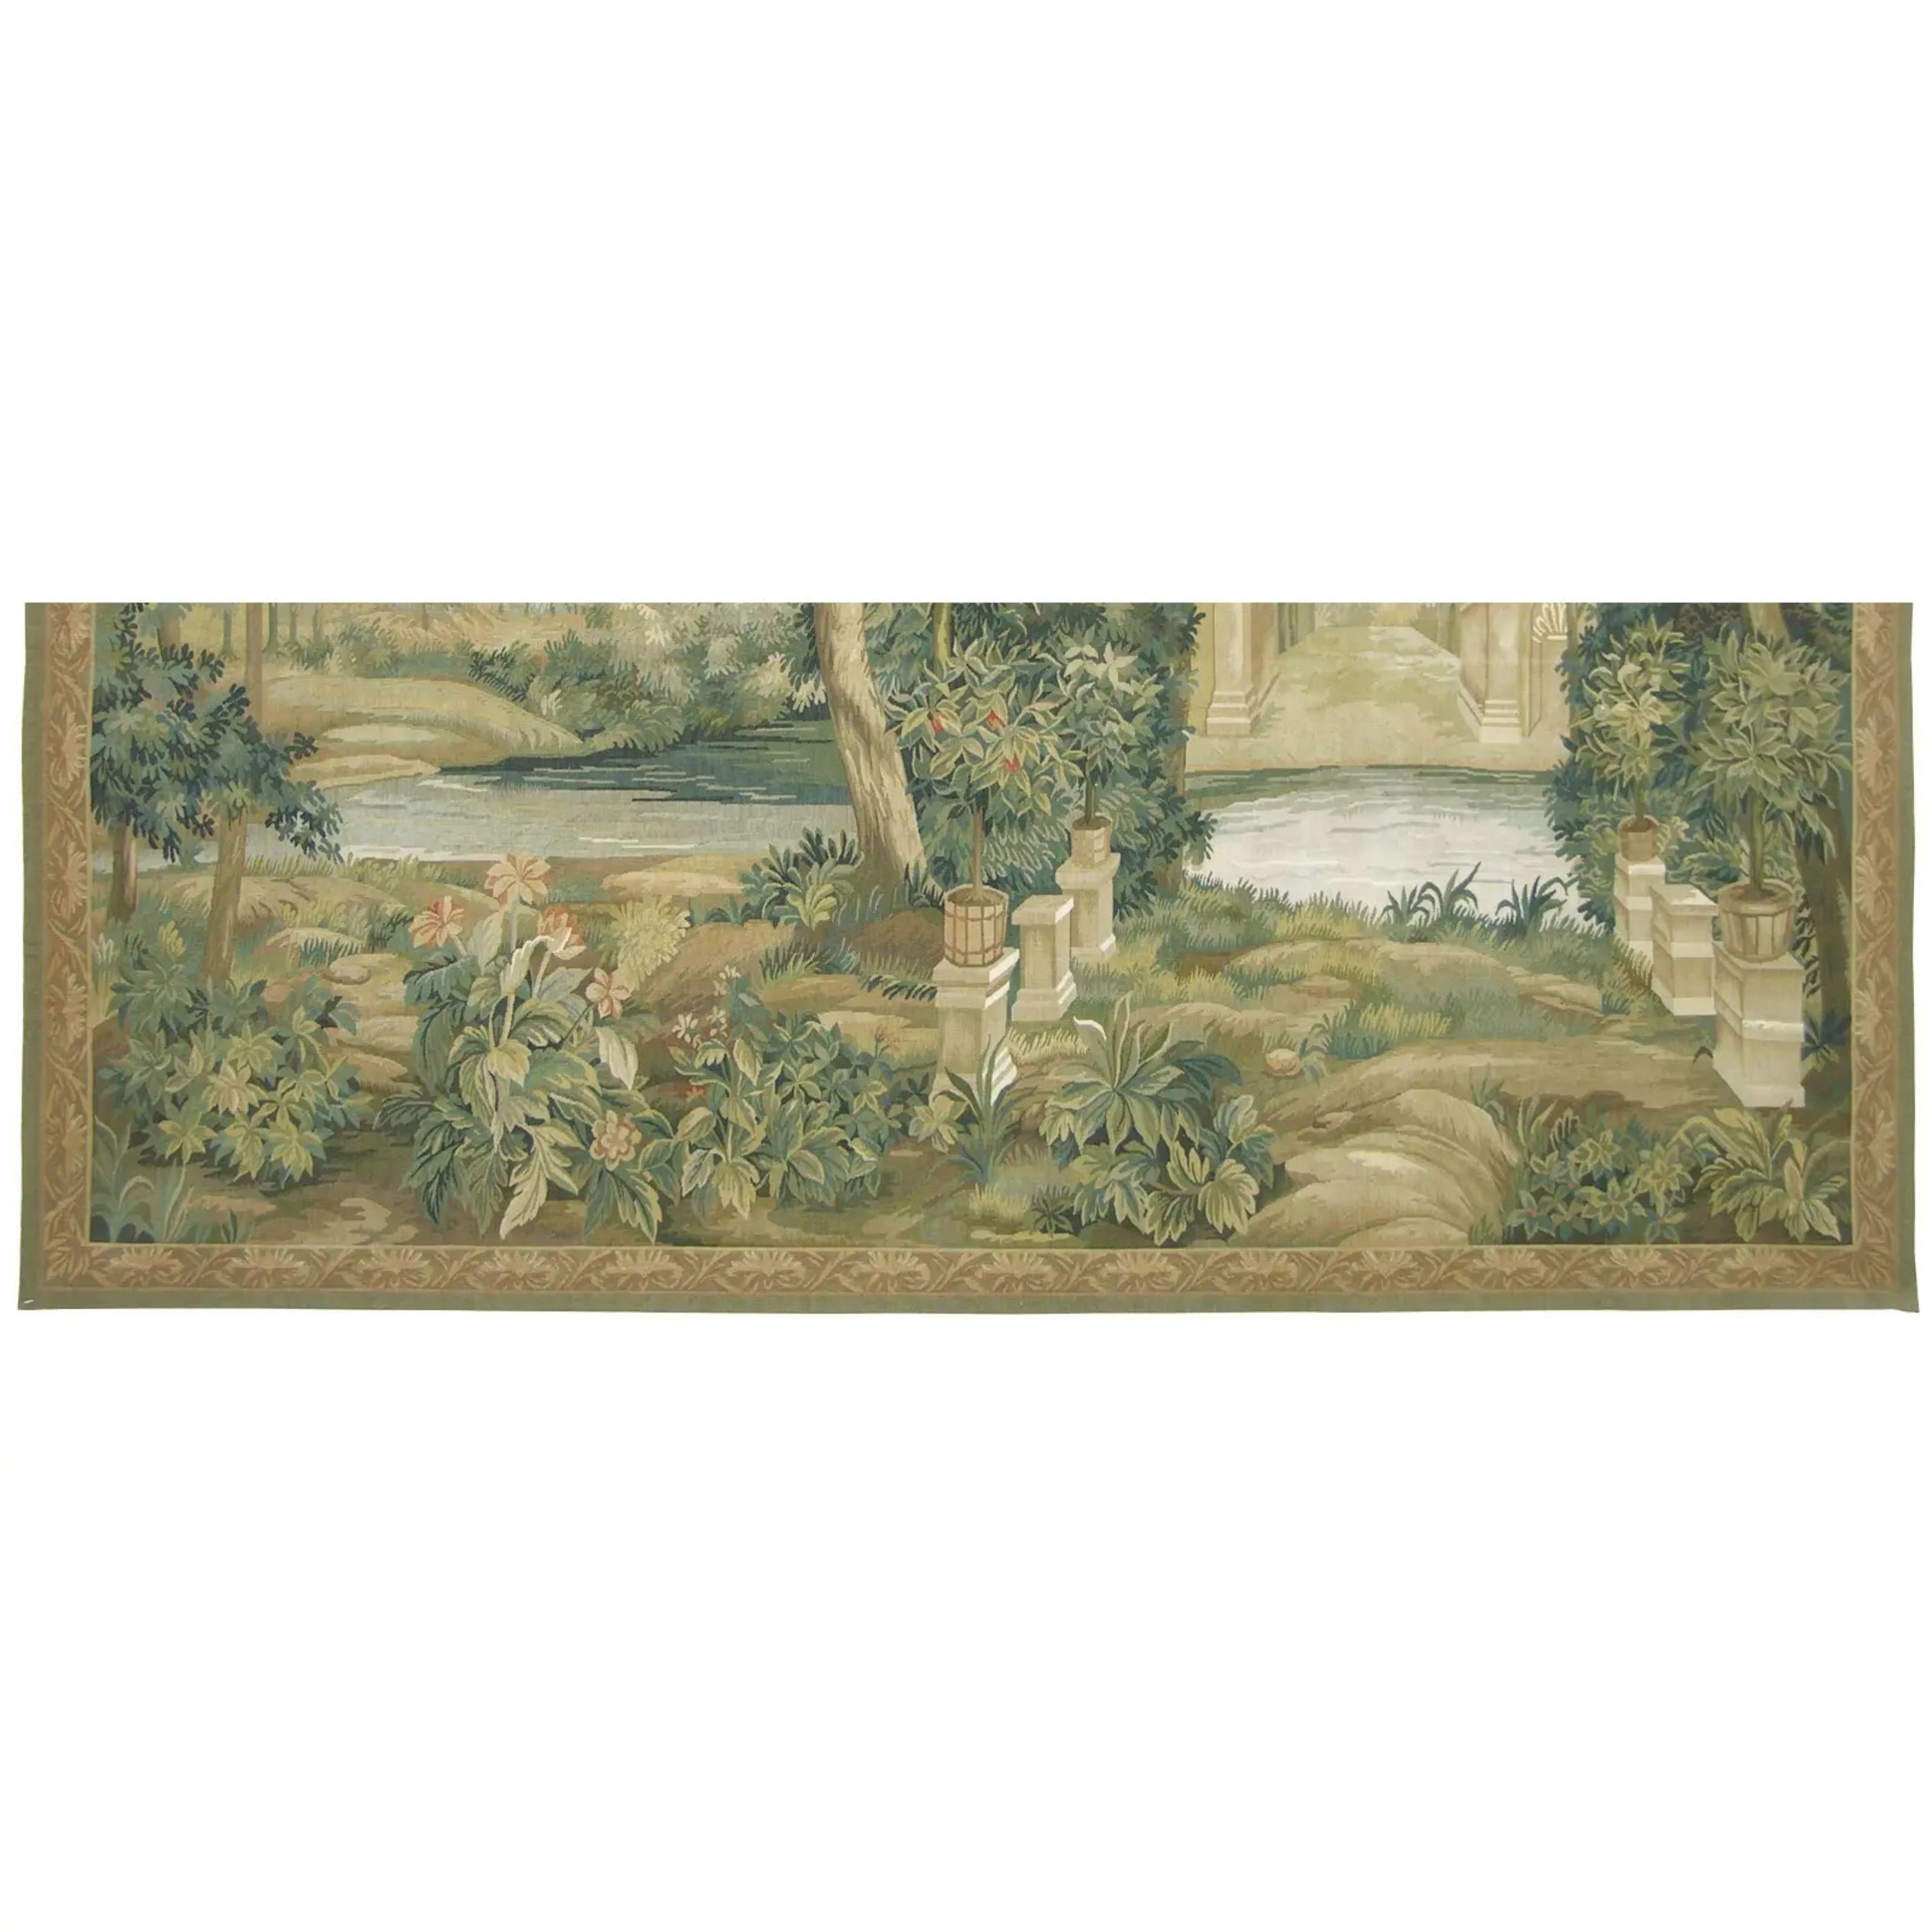 Unknown Vintage Tapestry Depicting a River 7.1X4.10 For Sale